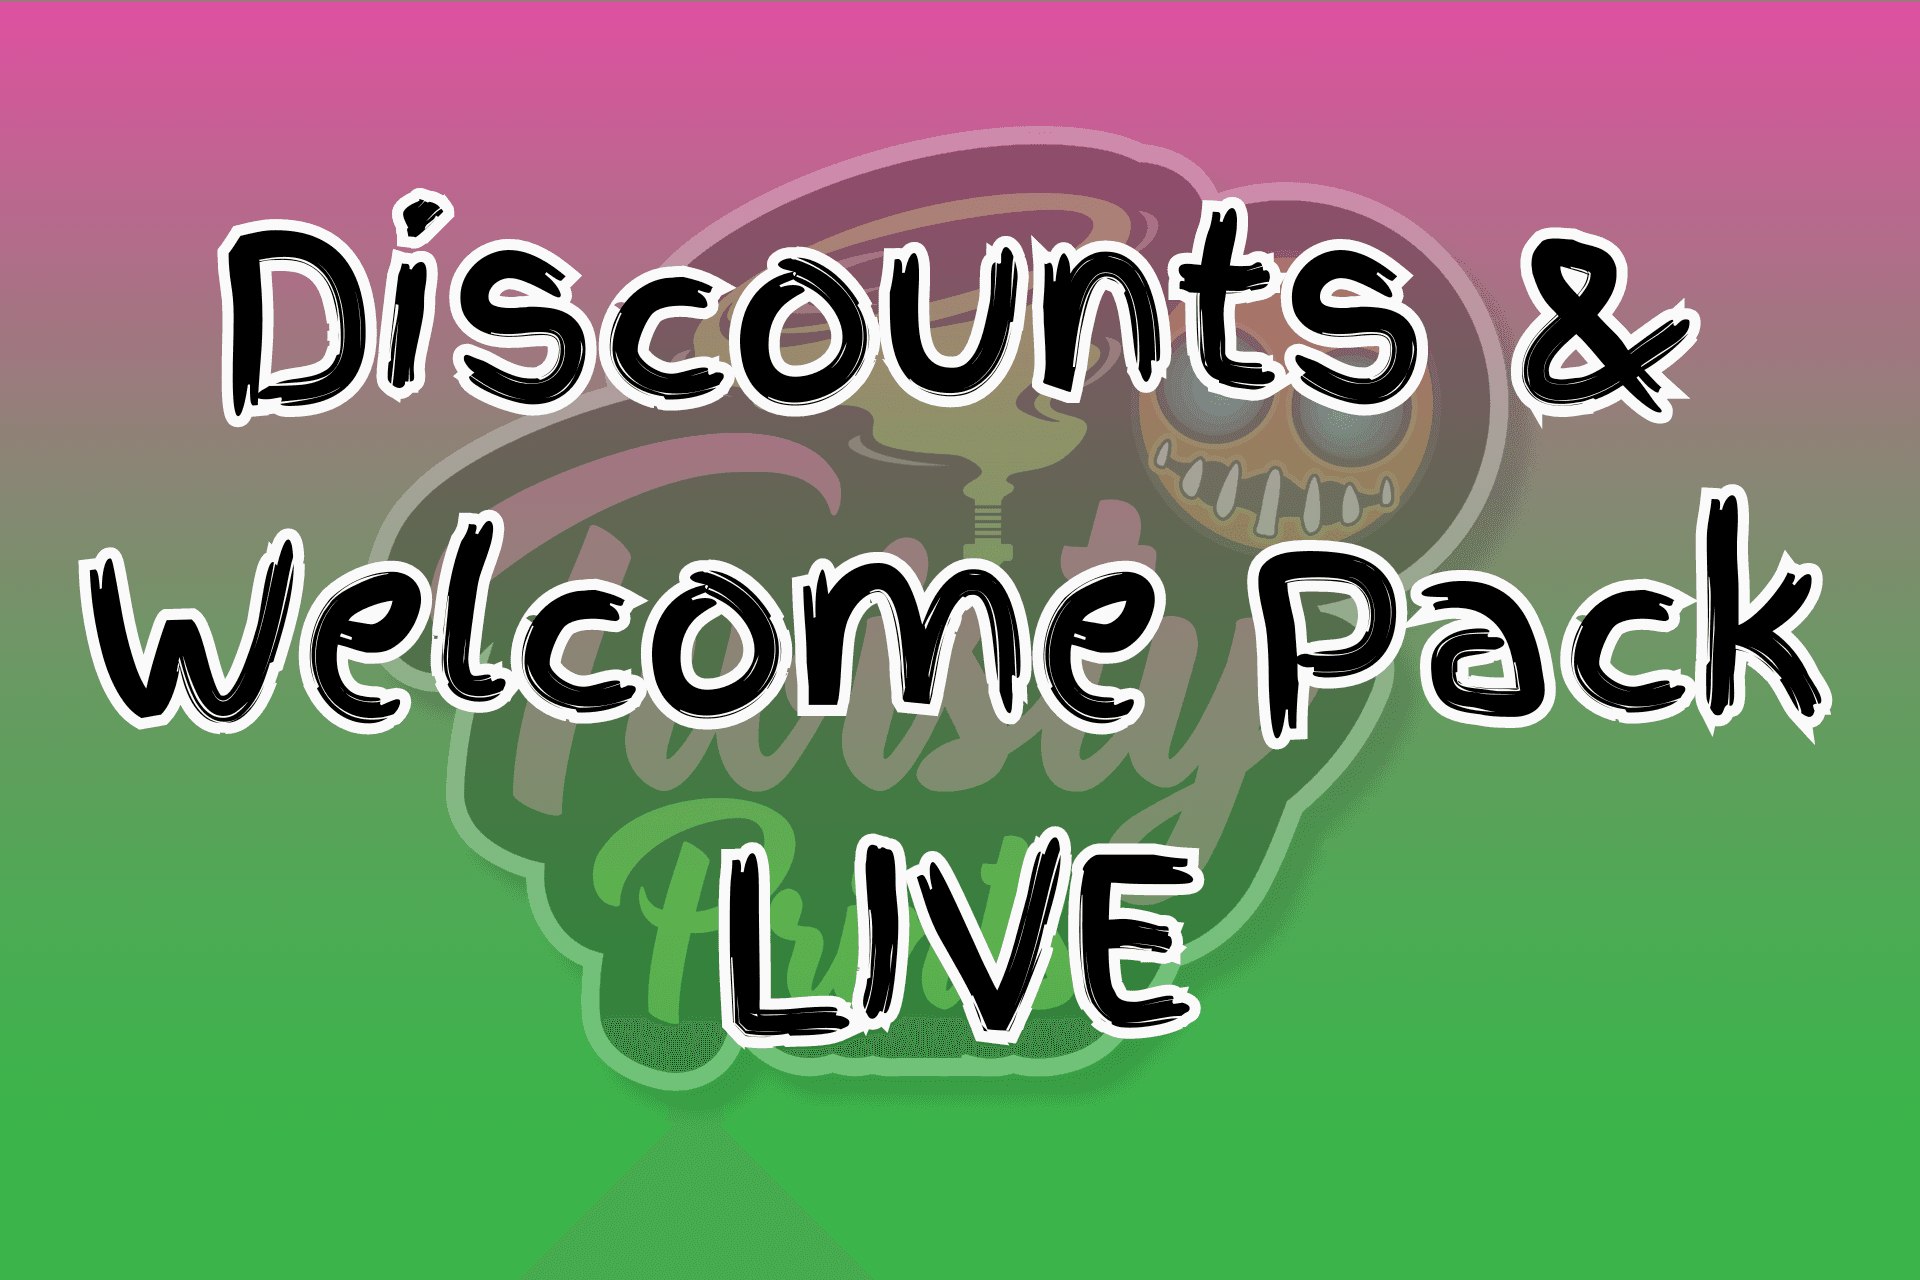 Store Discounts and Welcome Pack Up for Thangs Members